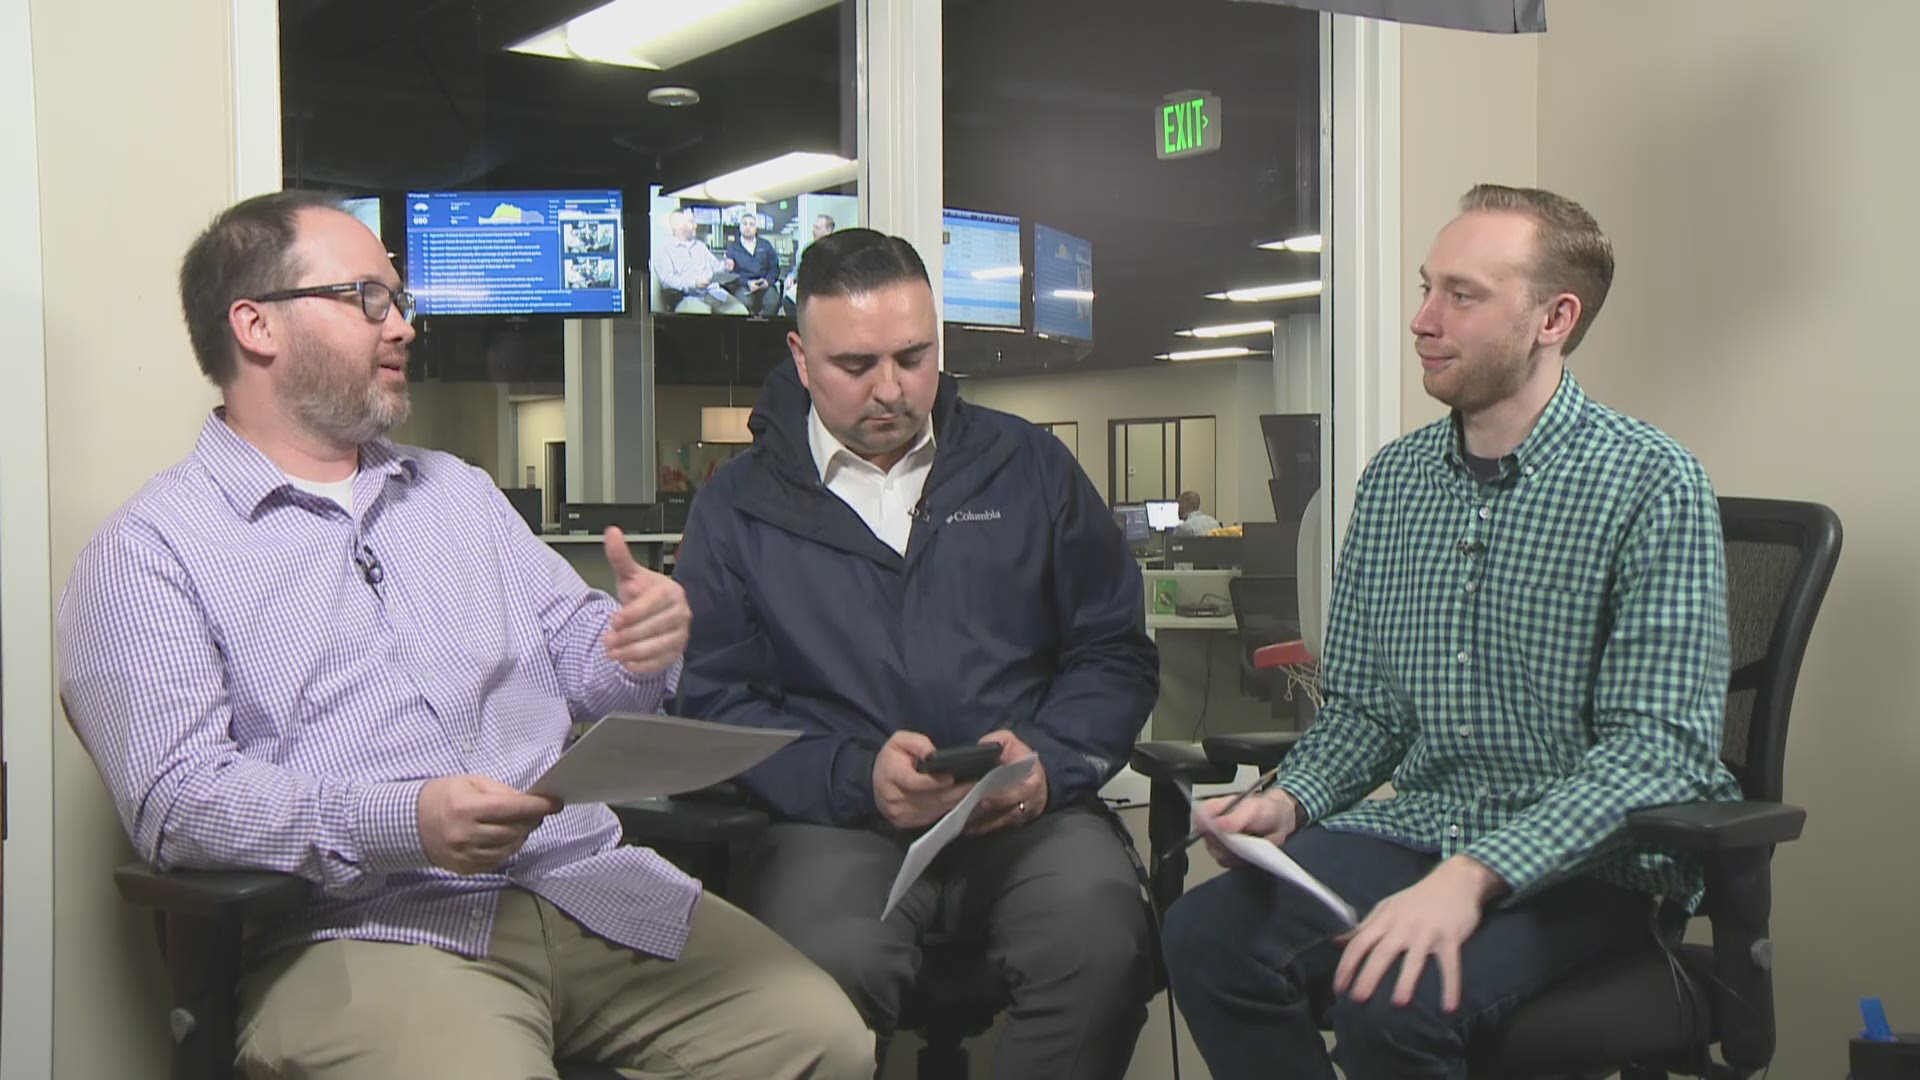 KGW's Jared Cowley, Orlando Sanchez and Nate Hanson debate where Damian Lillard would finish in the MVP race if the vote was held today.